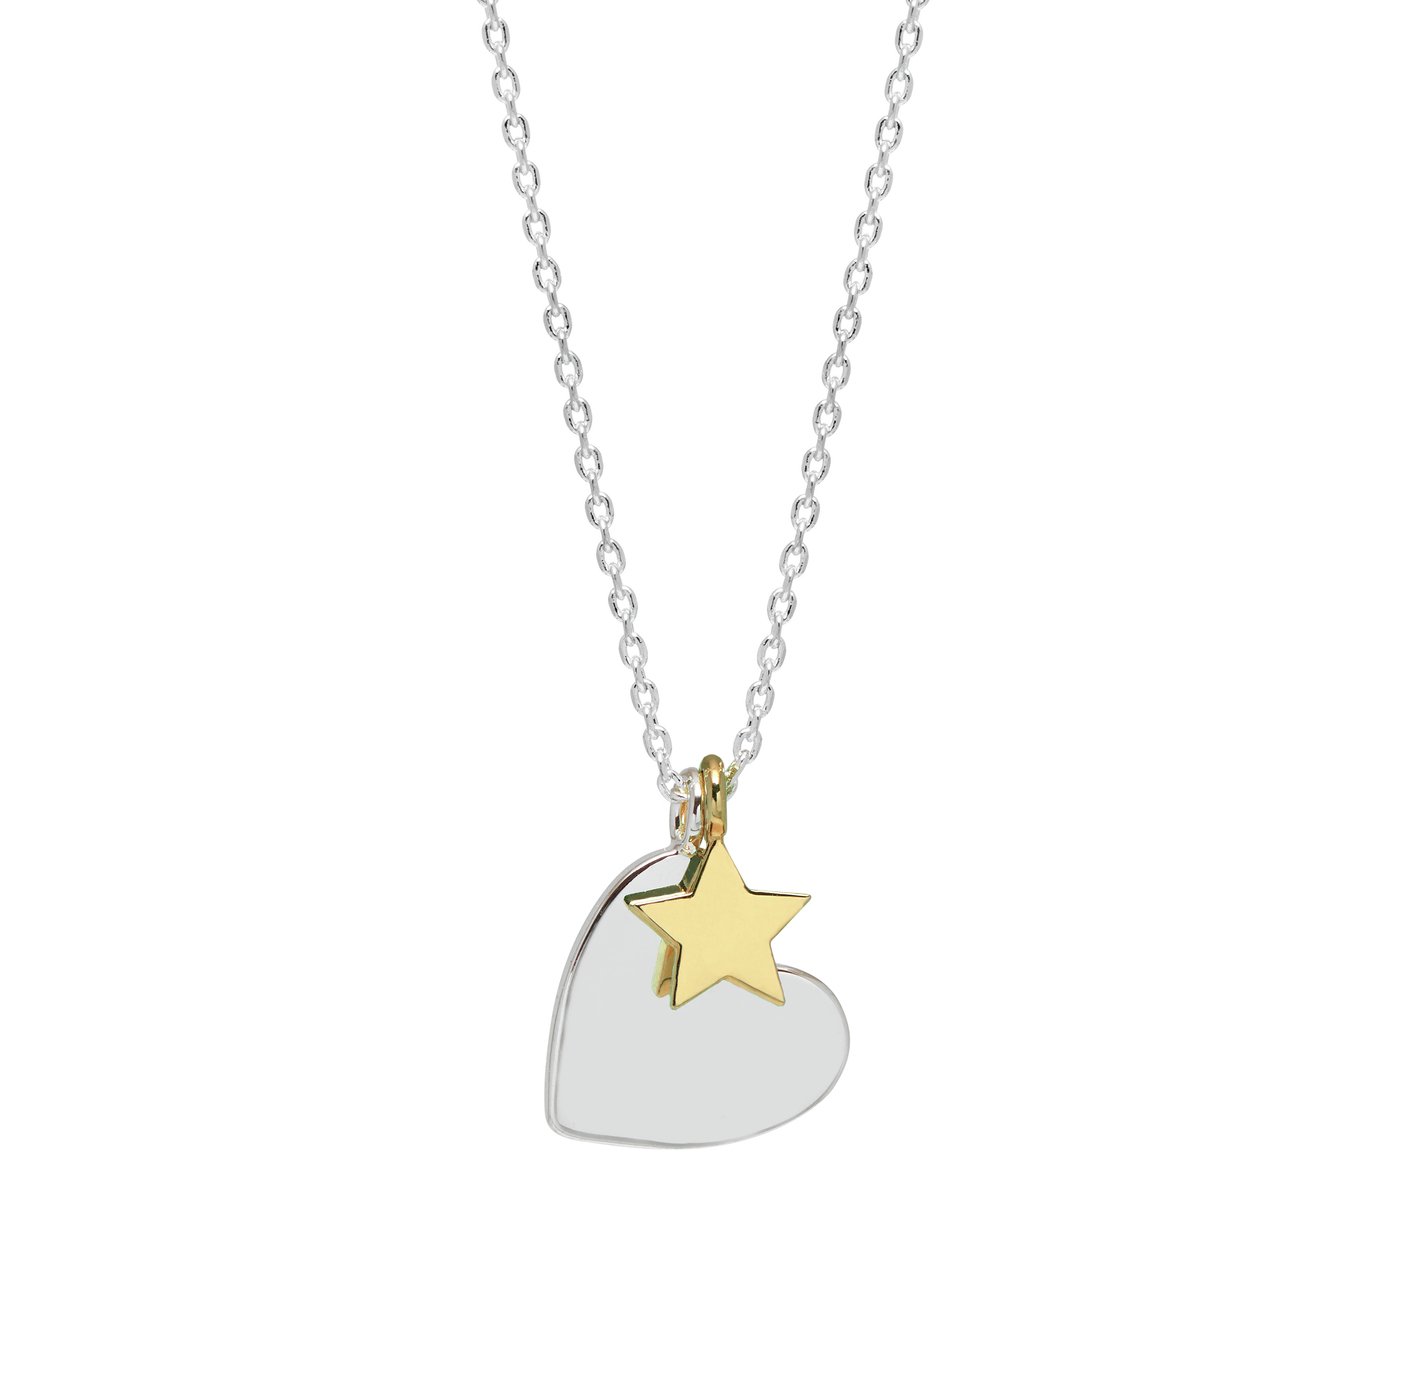 Amelia Grace Gold Star and Silver Heart Pendant Necklace